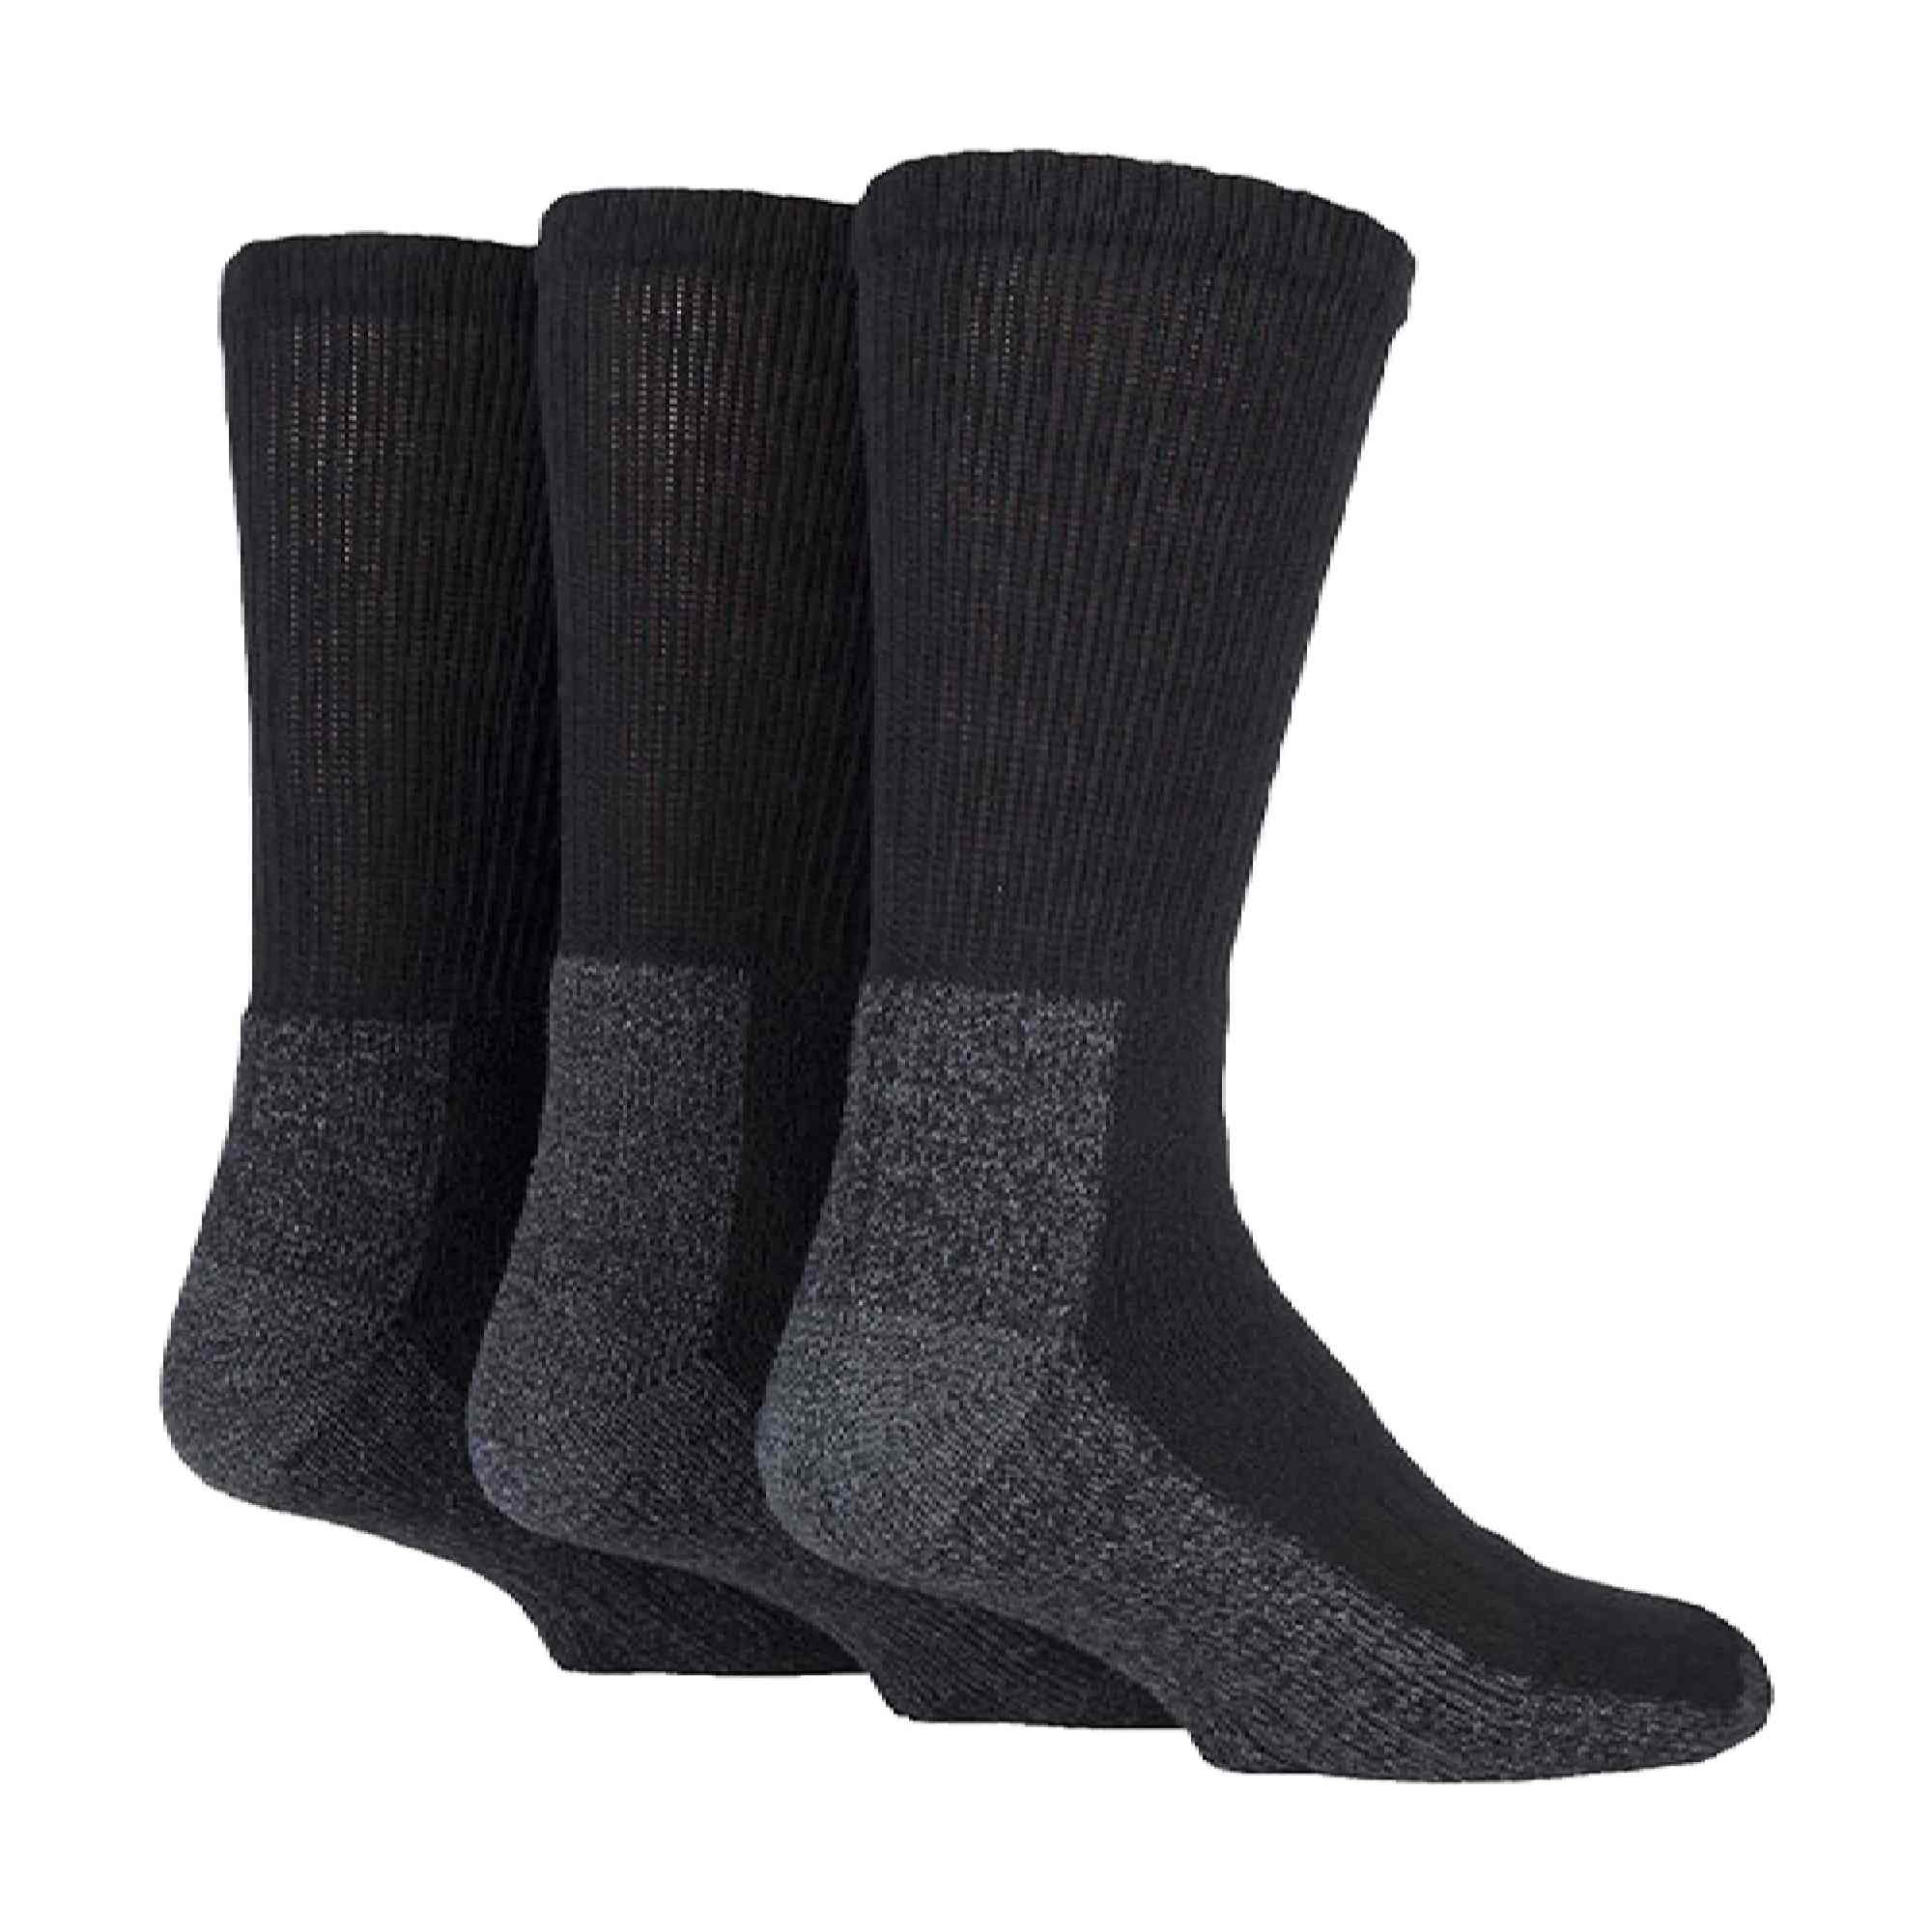 Men's Heavy Work Socks Thermal Chunky construction ideal for steel toe  boots Lot